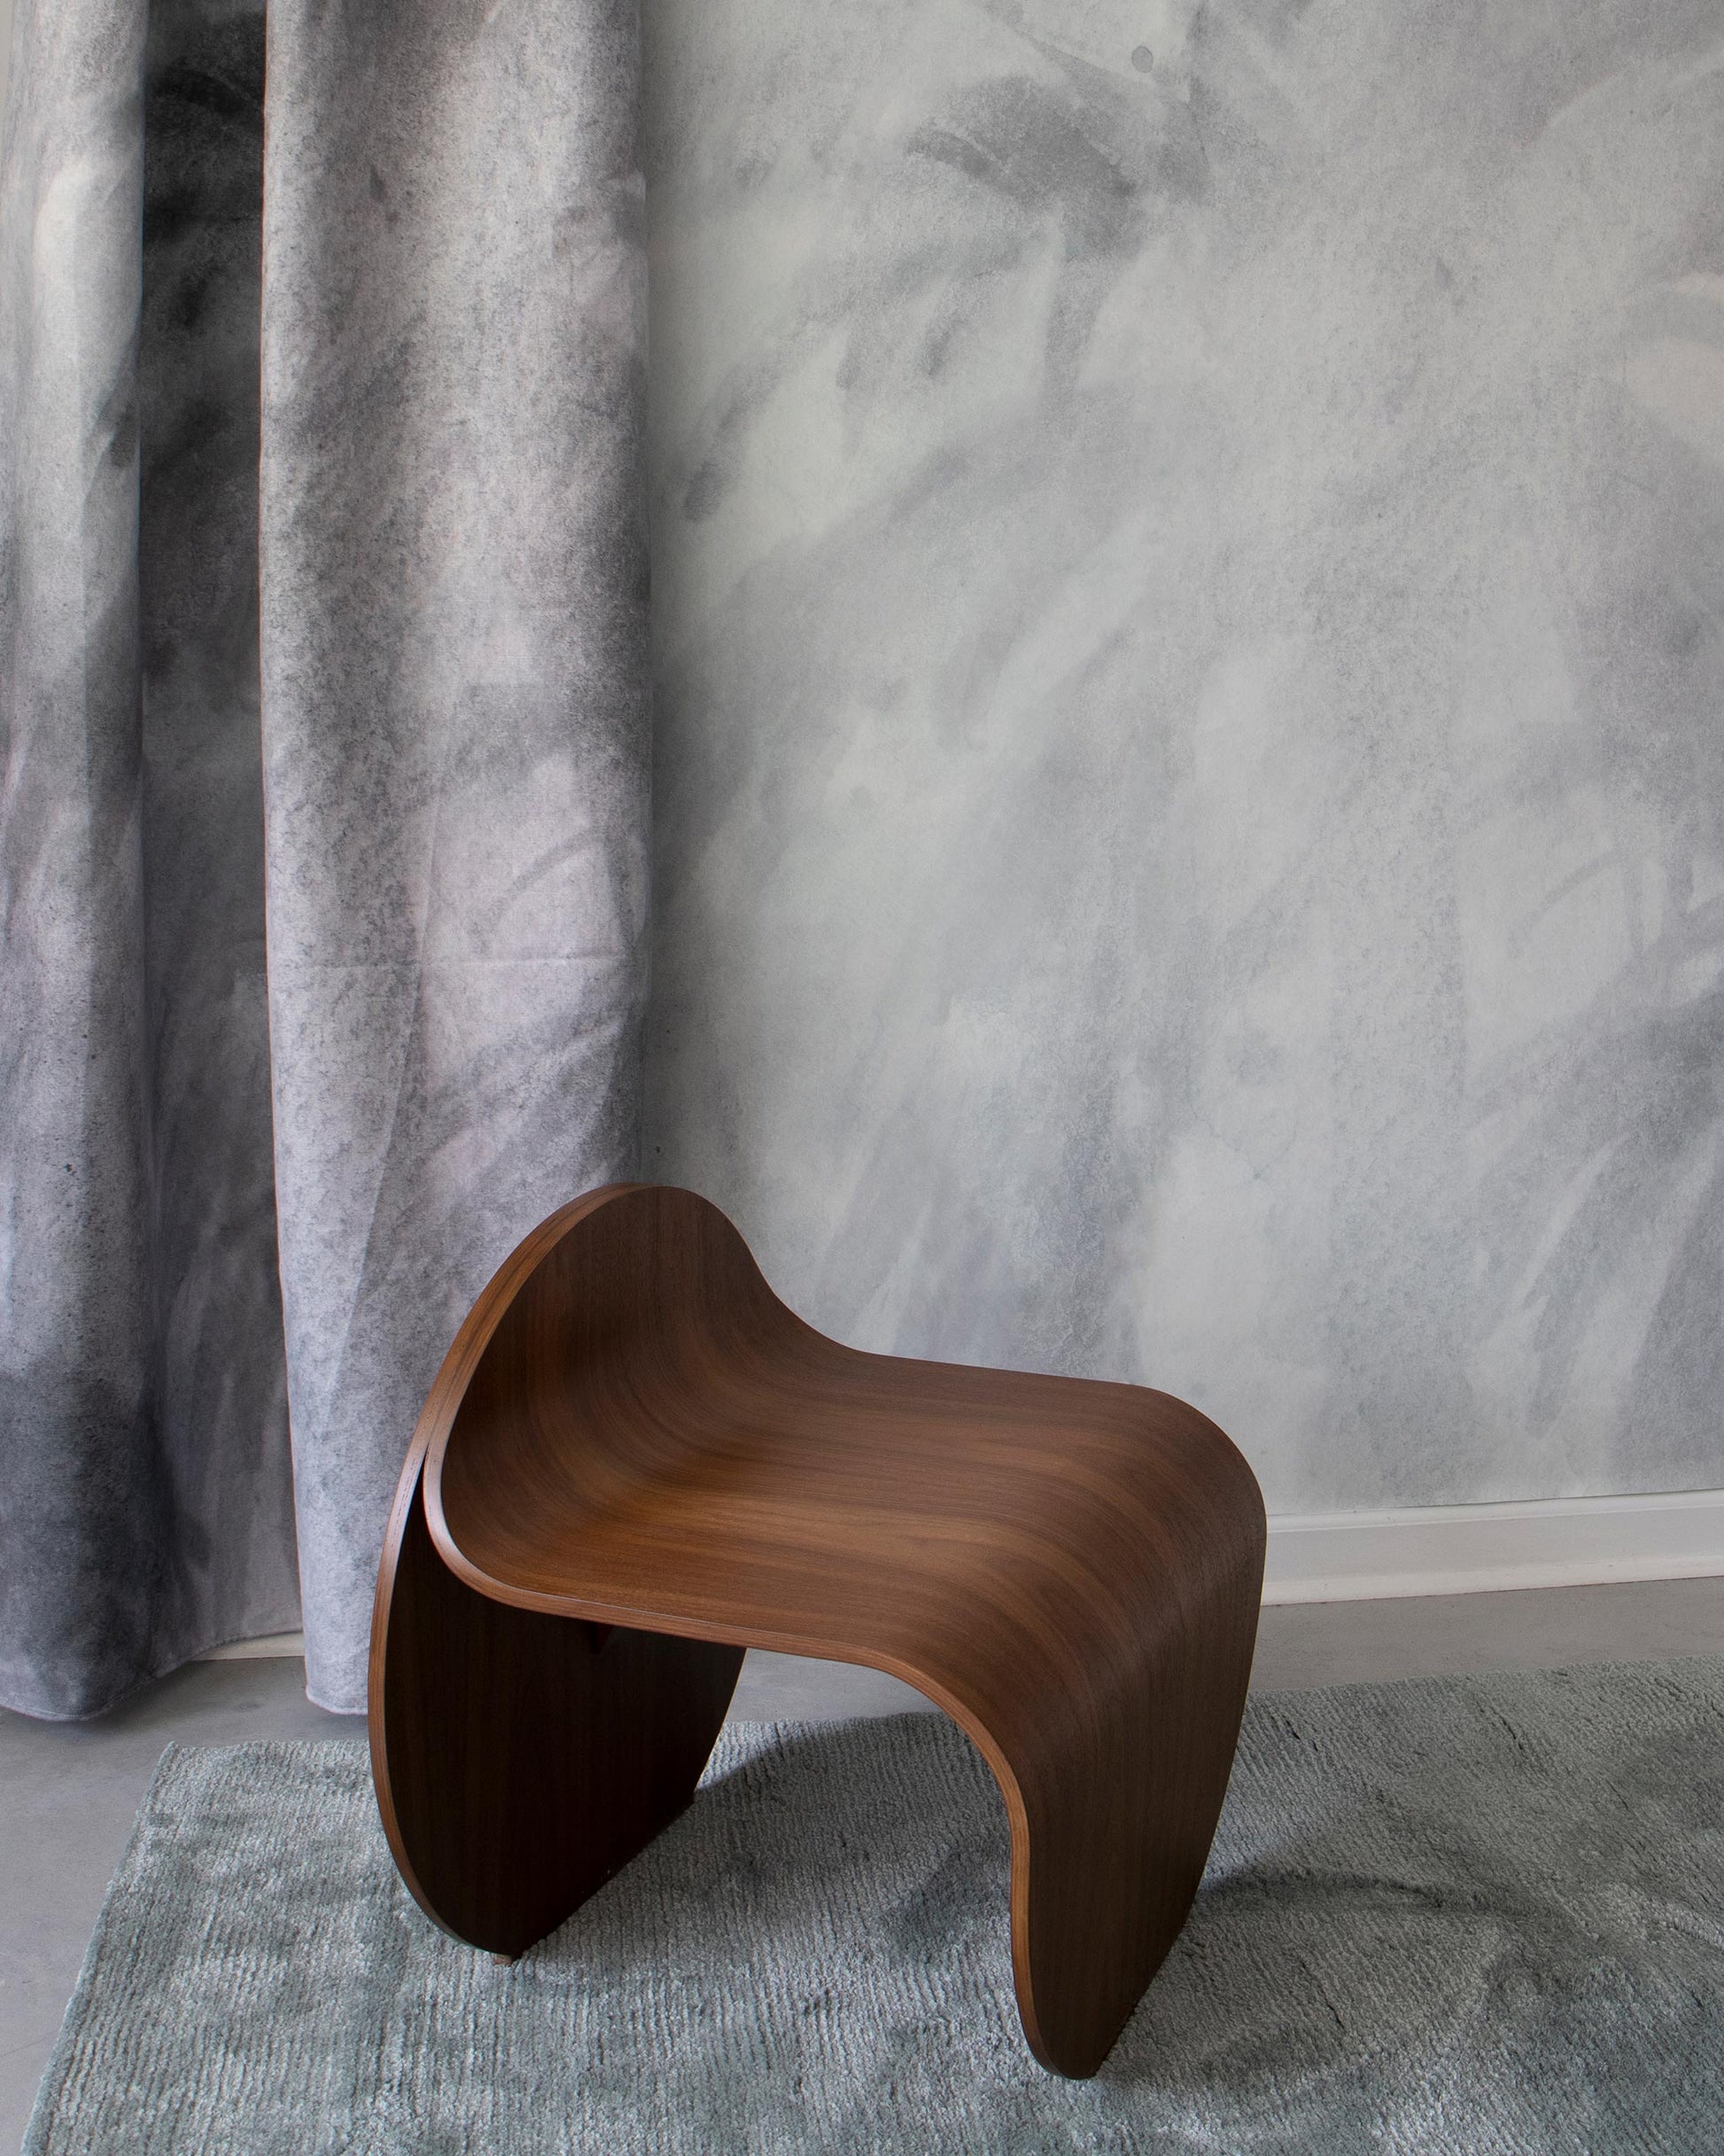 A wooden stool is sitting on a Reflettere Fabric Aqua rug in front of a mural wallpaper